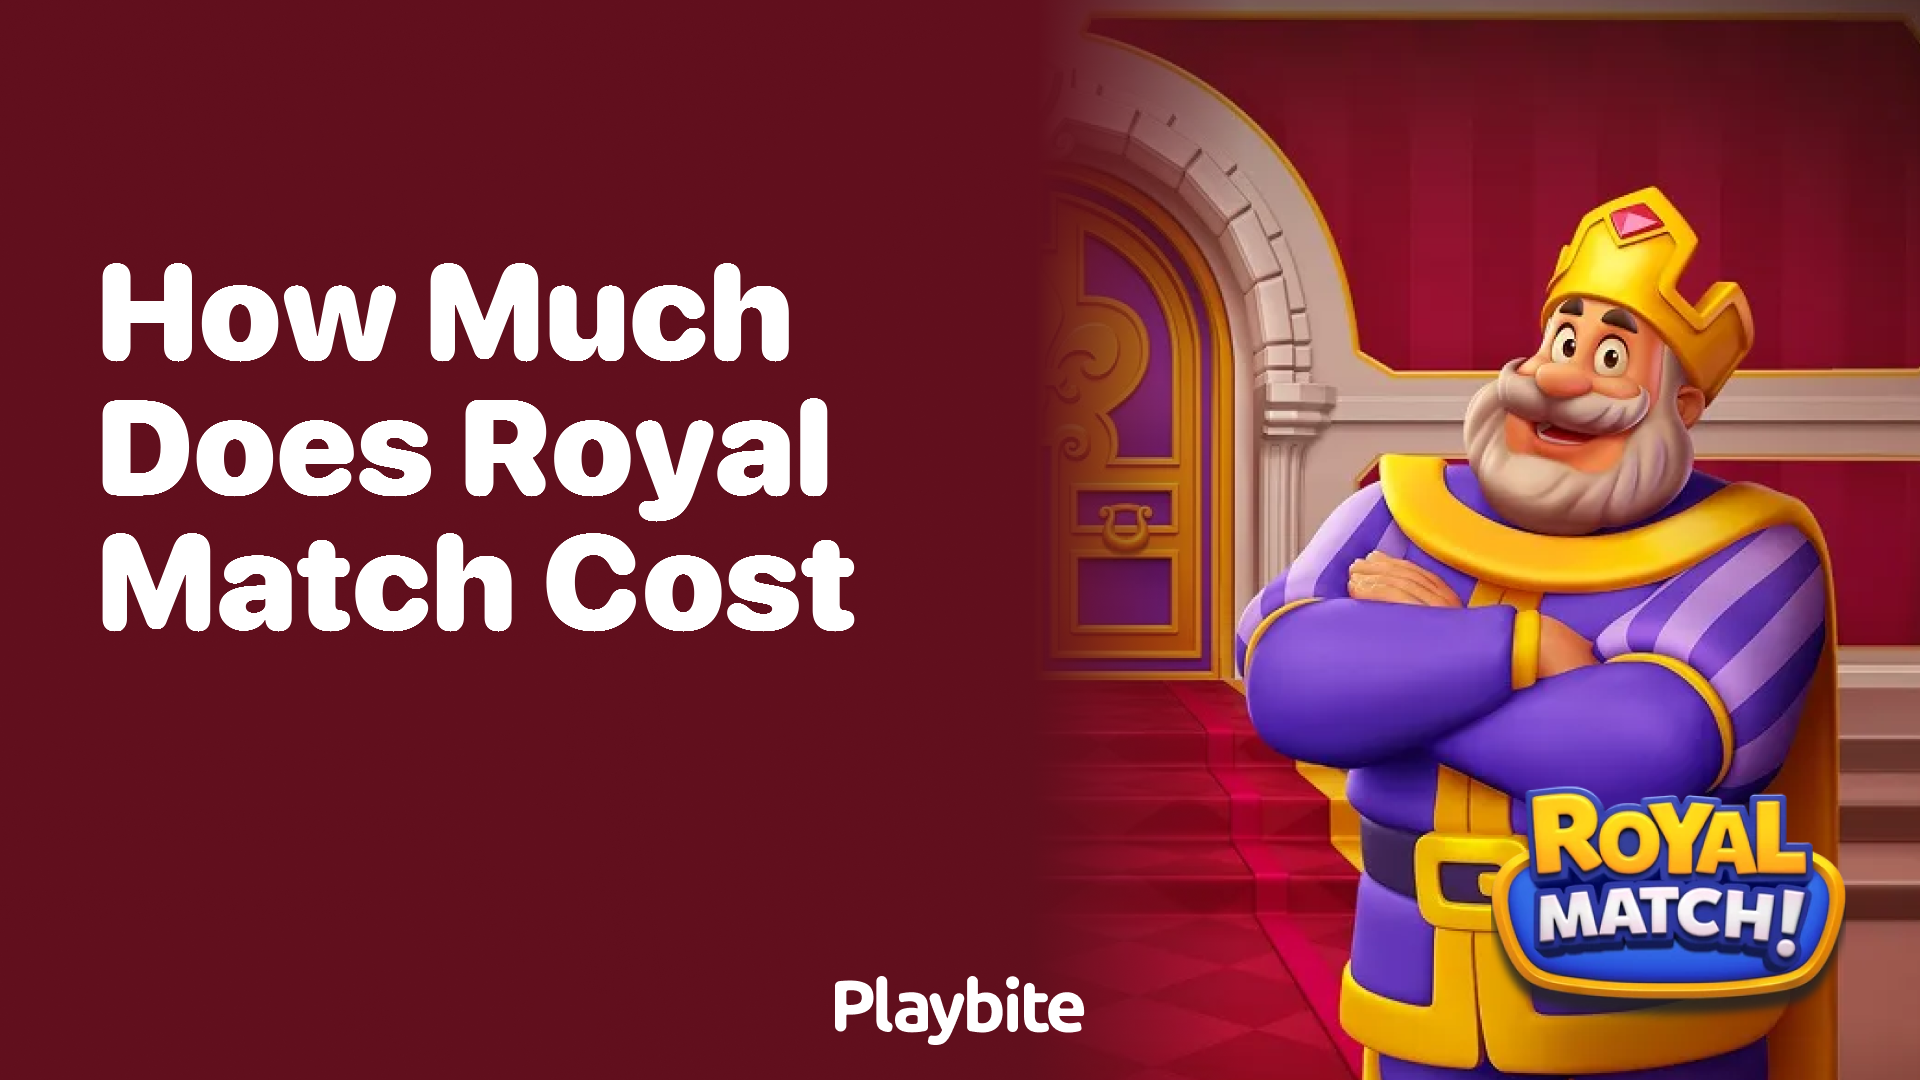 How Much Does Royal Match Cost?